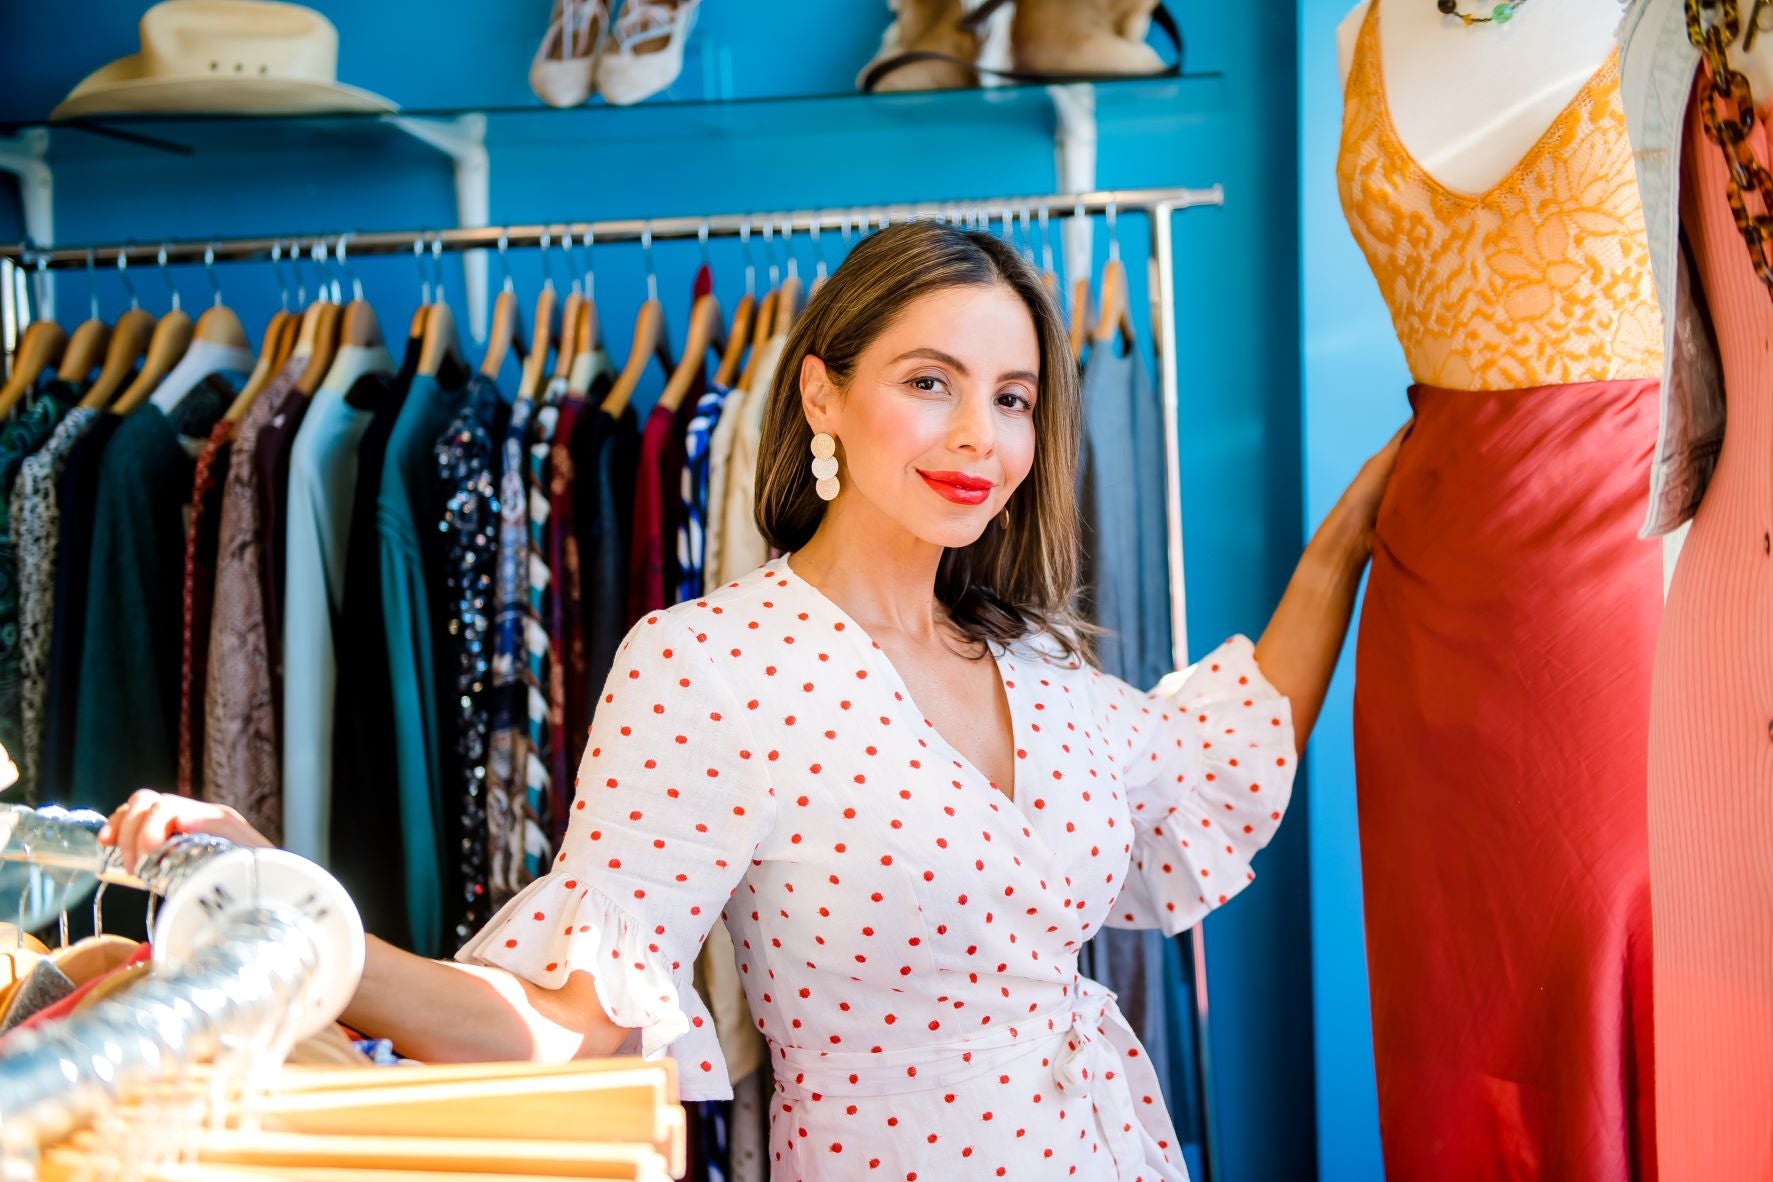 Everything You Want to Know About Consignment Shopping